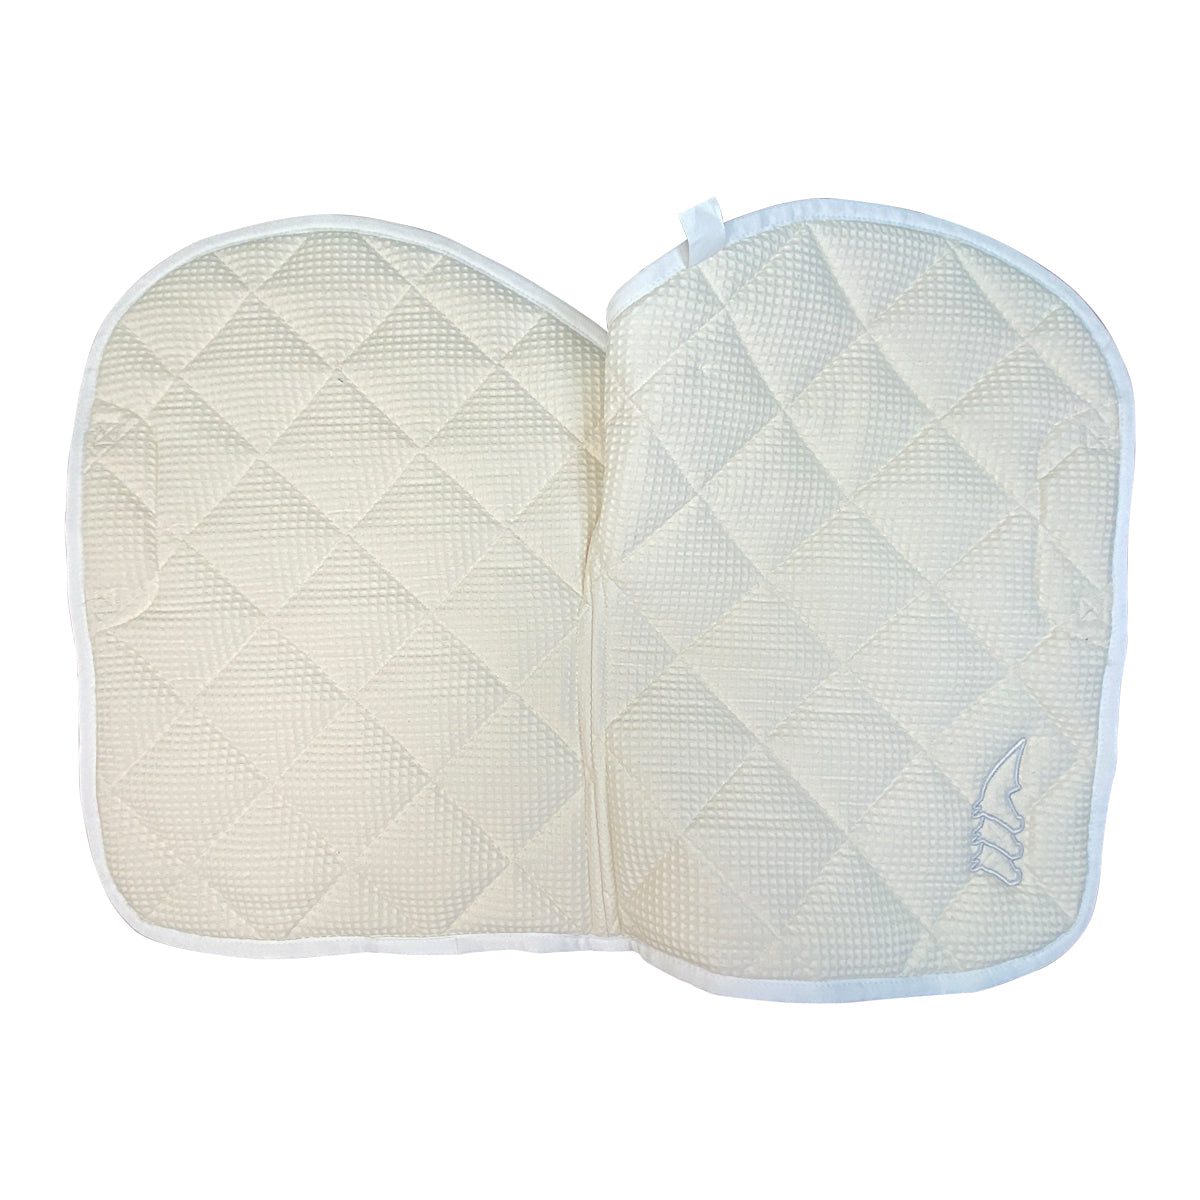 Equiline EGRIT RN &#39;Rombo&#39; Saddle Pad in White W/ Honeycomb Inserts